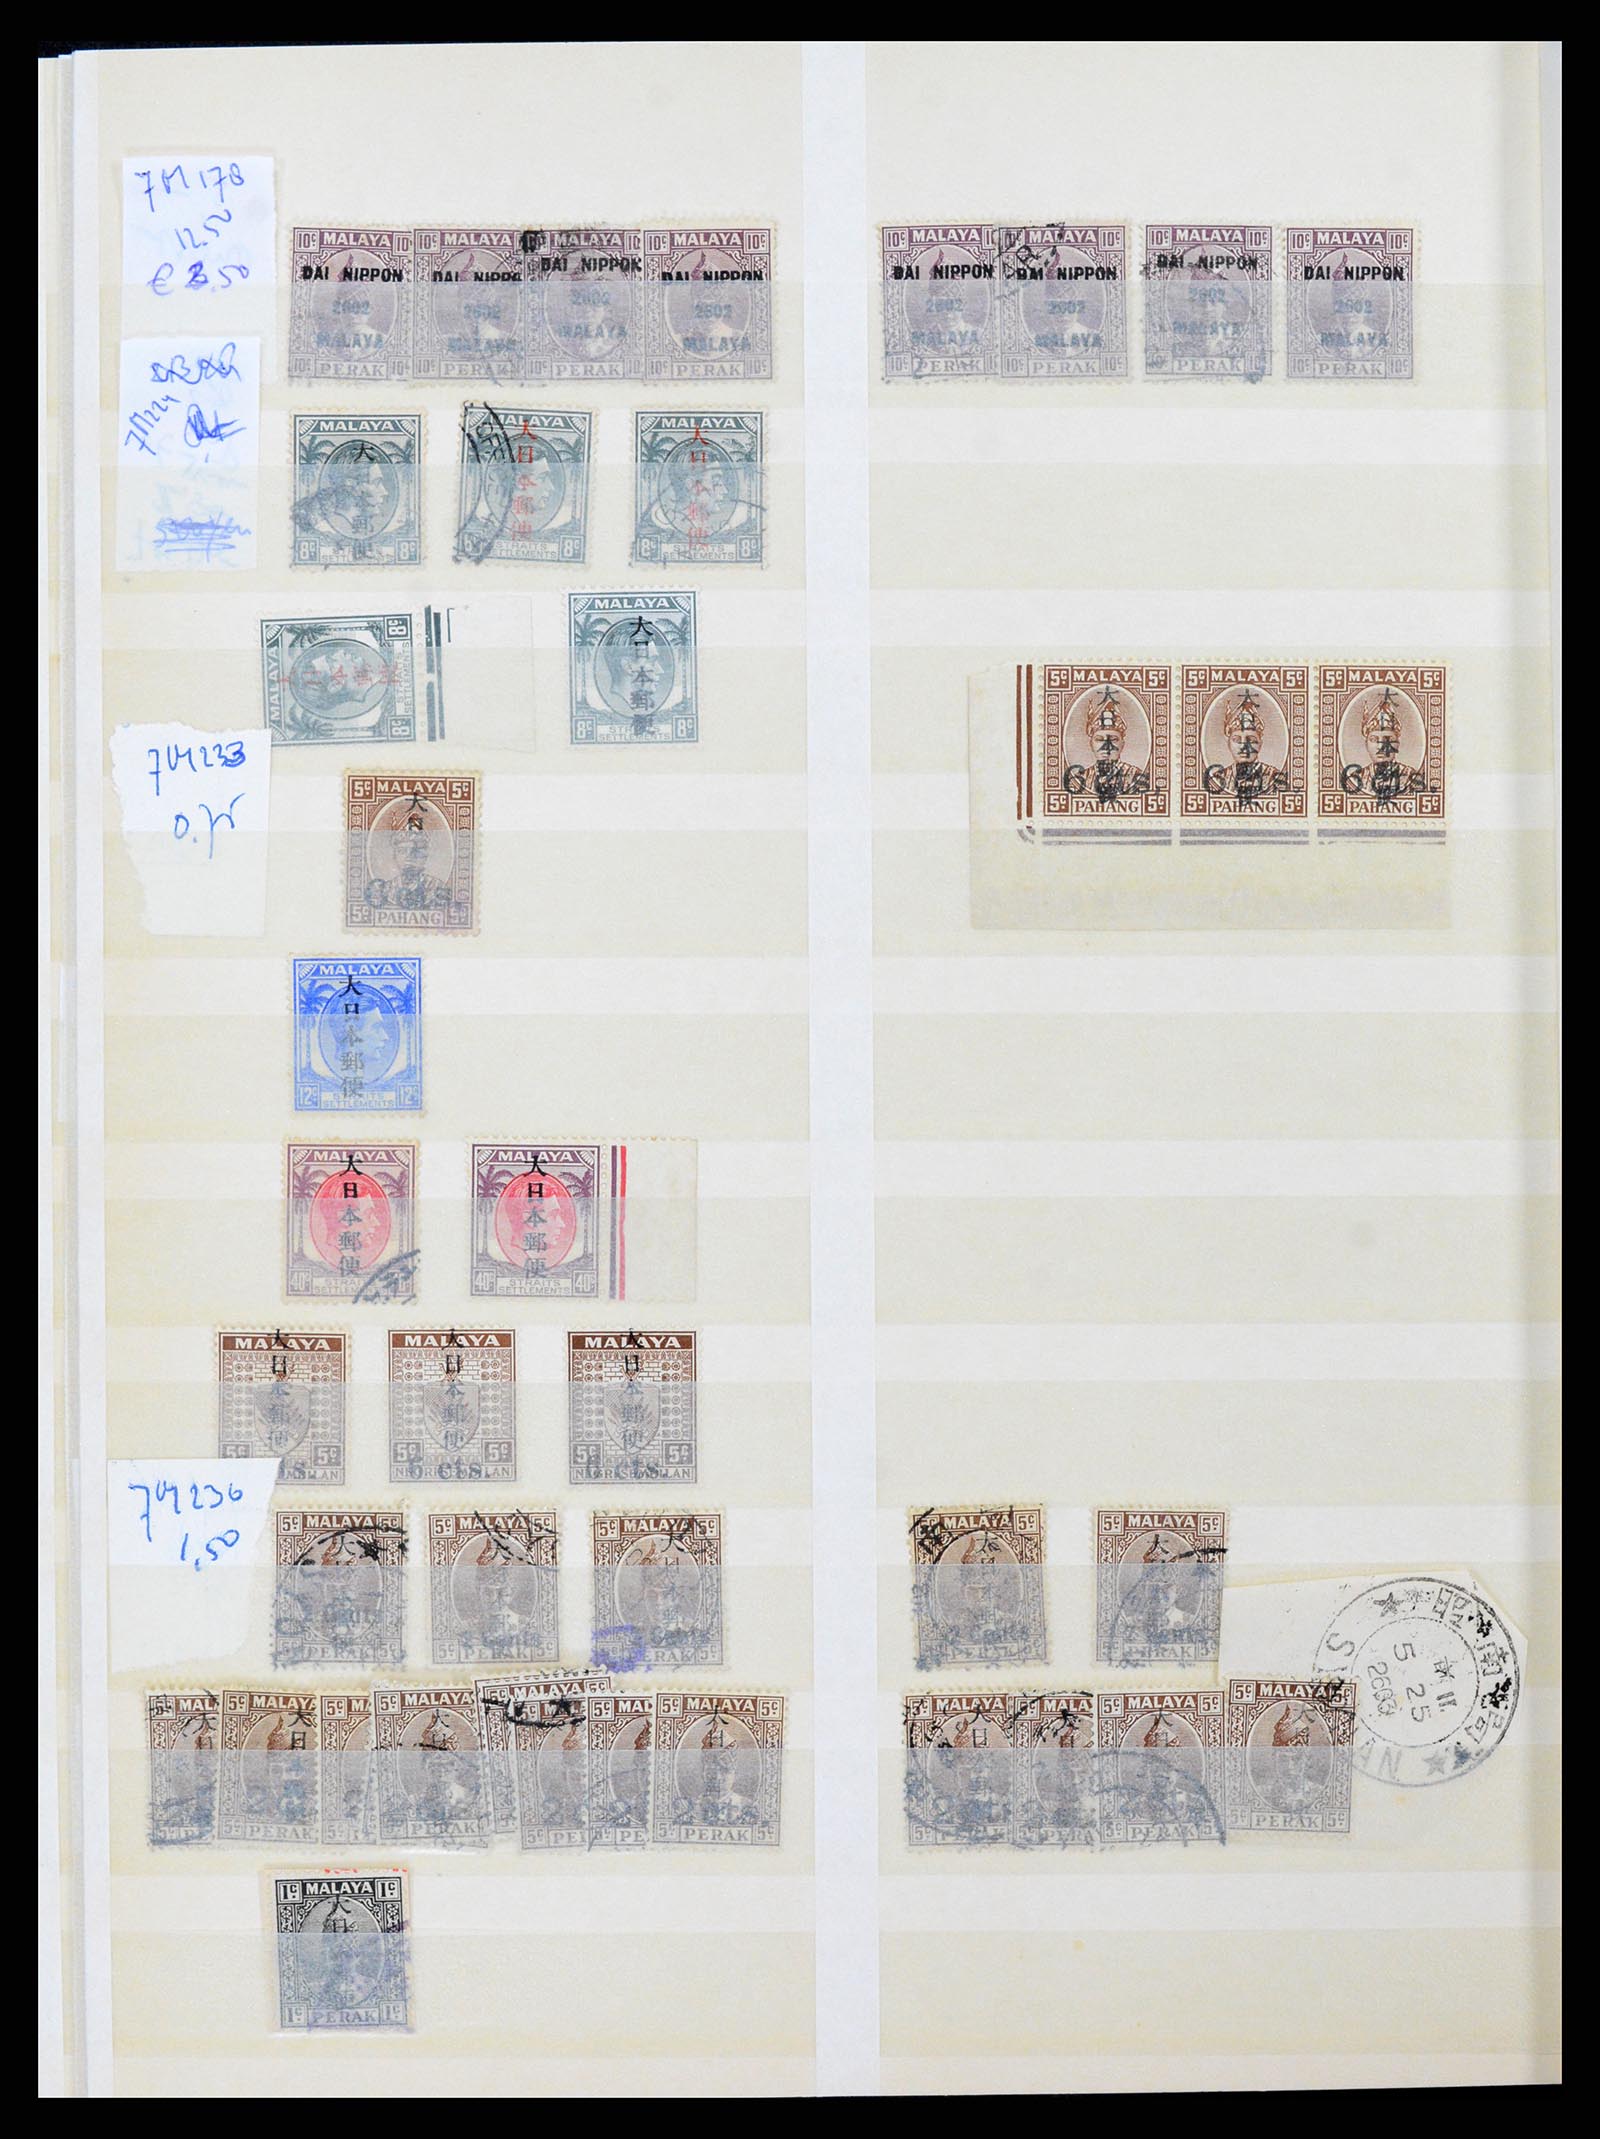 37429 036 - Stamp collection 37429 Japanese occupation Dutch East Indies 1942-1945.